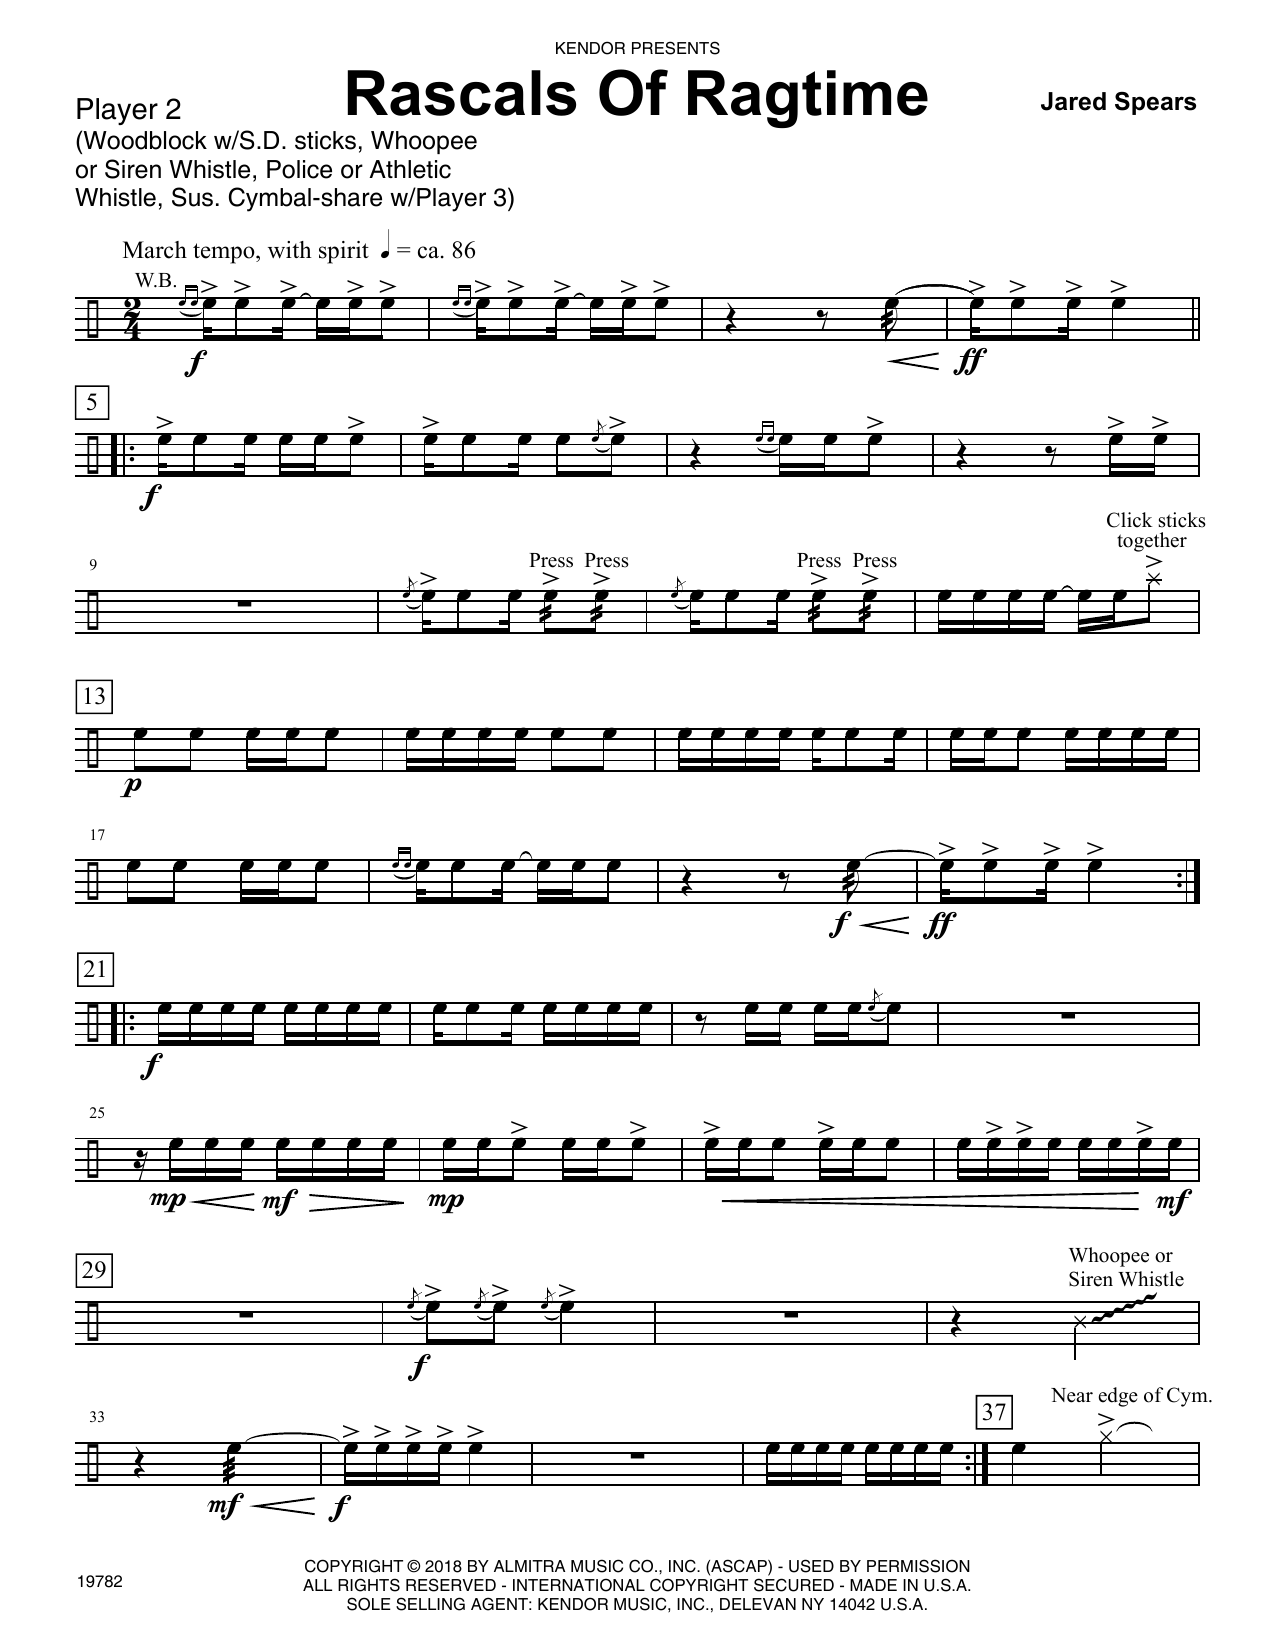 Download Jared Spears Rascals Of Ragtime - Percussion 2 Sheet Music